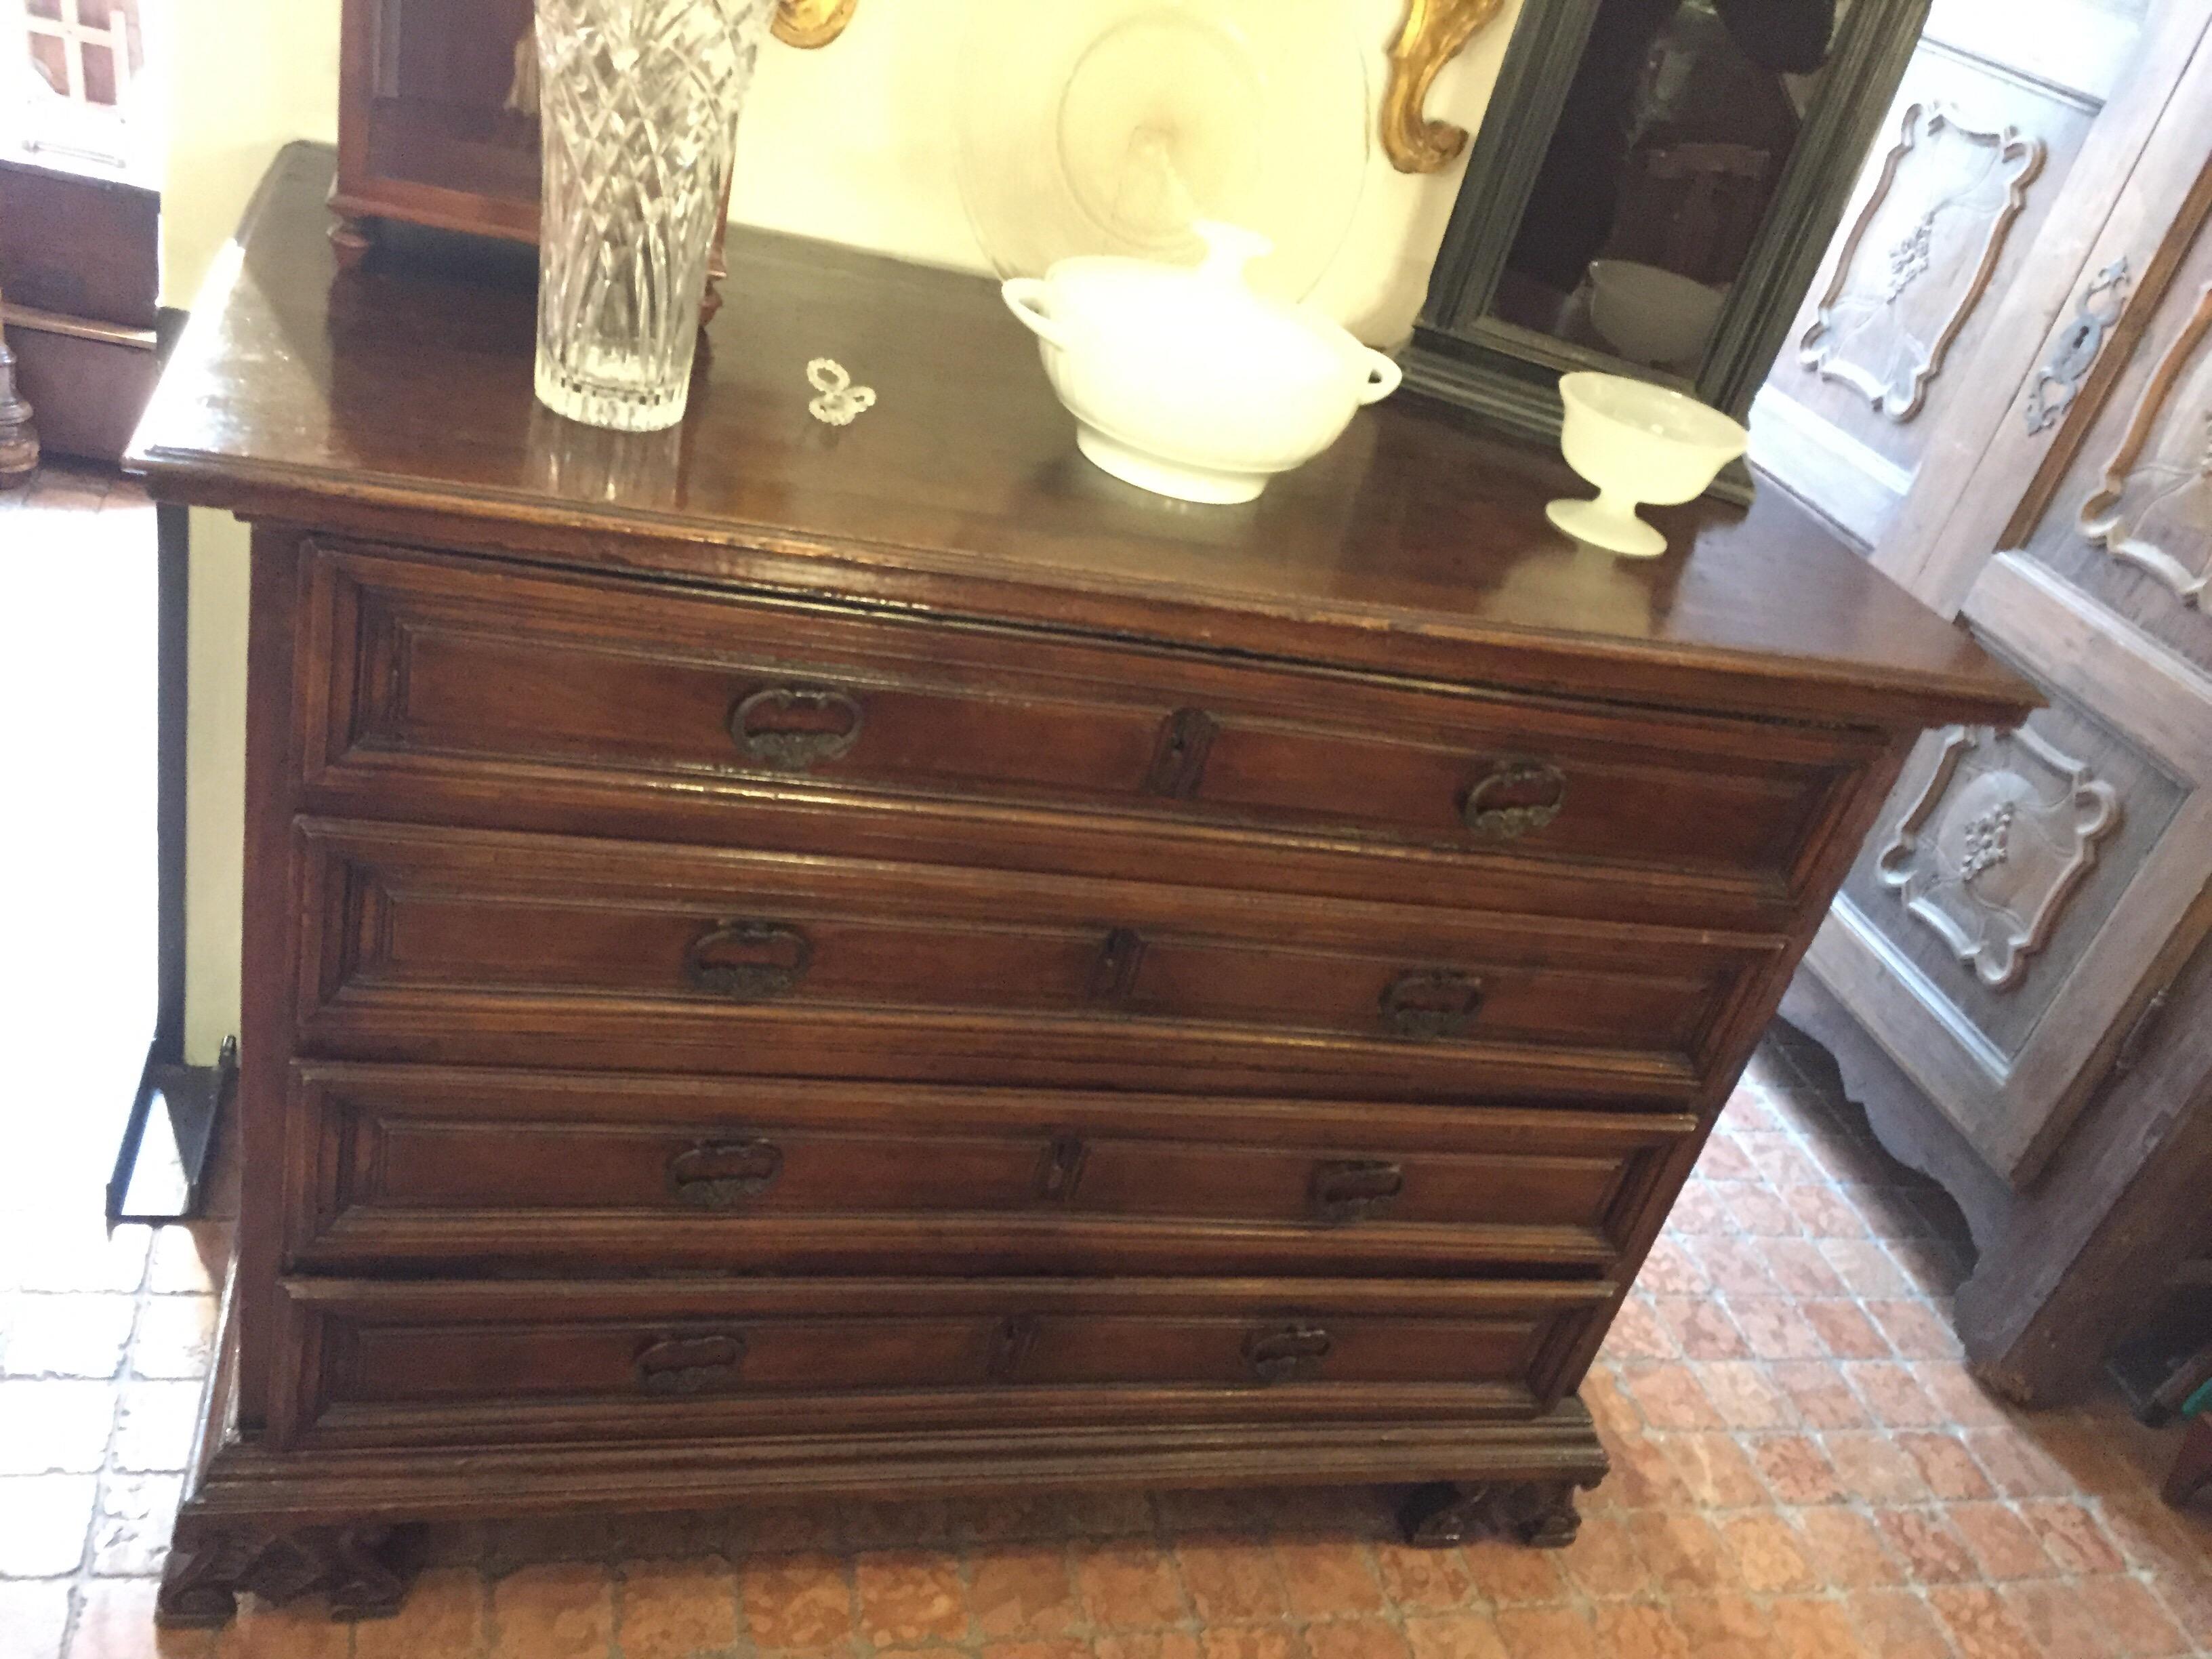 Northern Italian Baroque Walnut Commode 18th Century Chest of Four Drawers 16